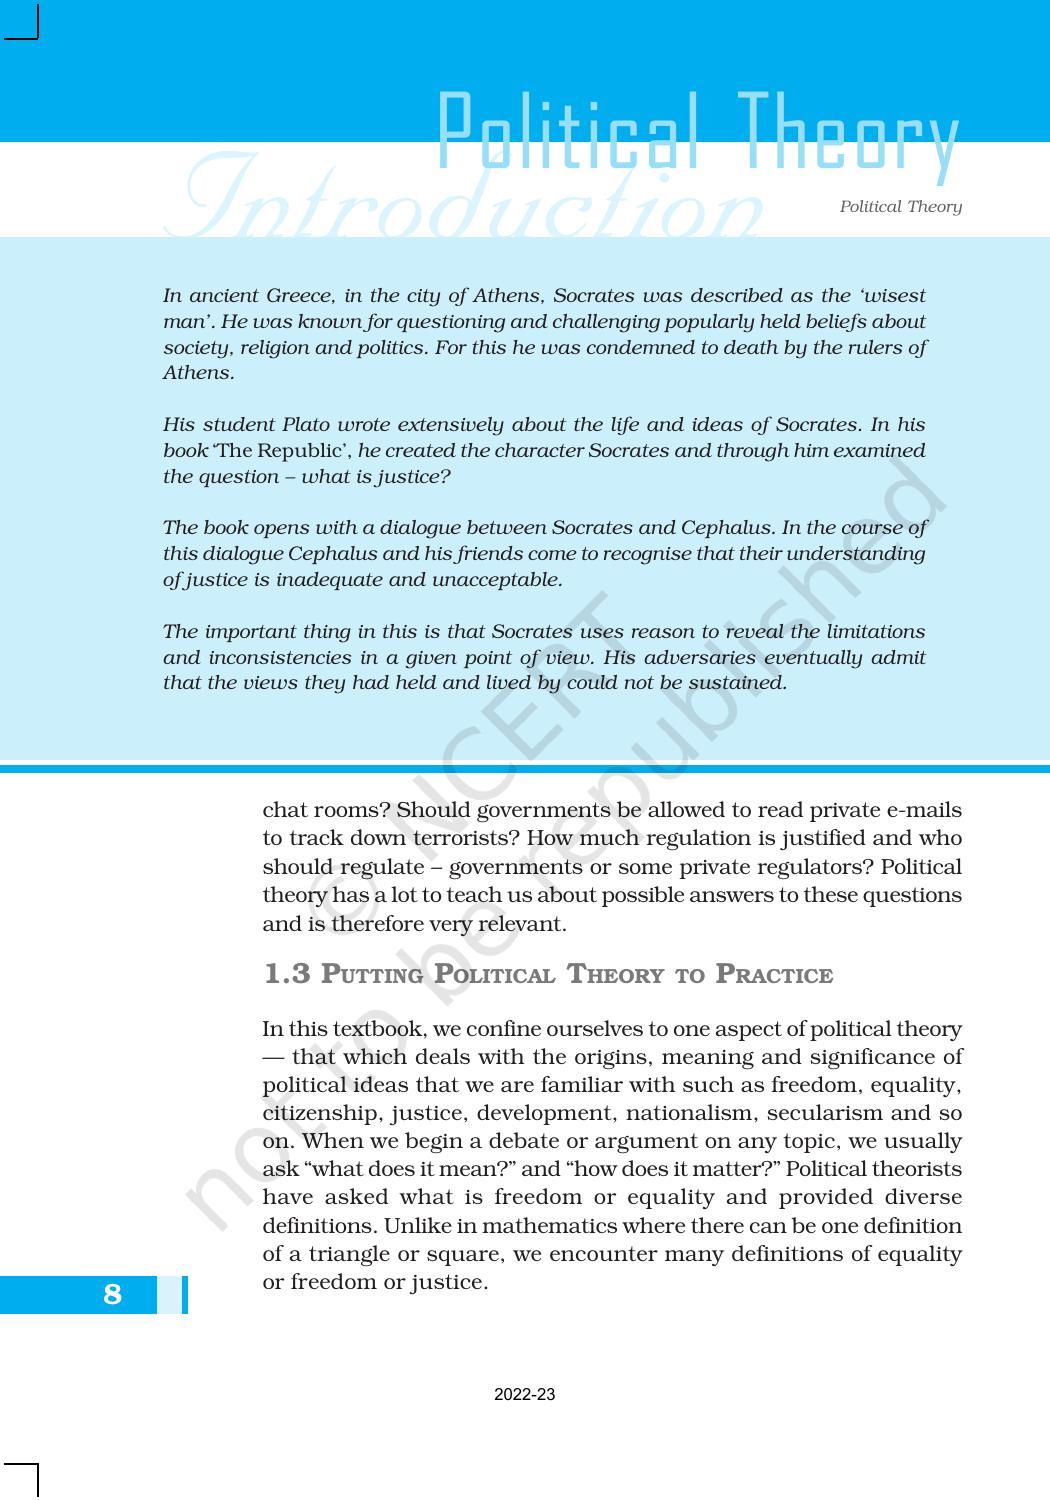 NCERT Book for Class 11 Political Science (Political Theory) Chapter 1 Political Theory: An Introduction - Page 8